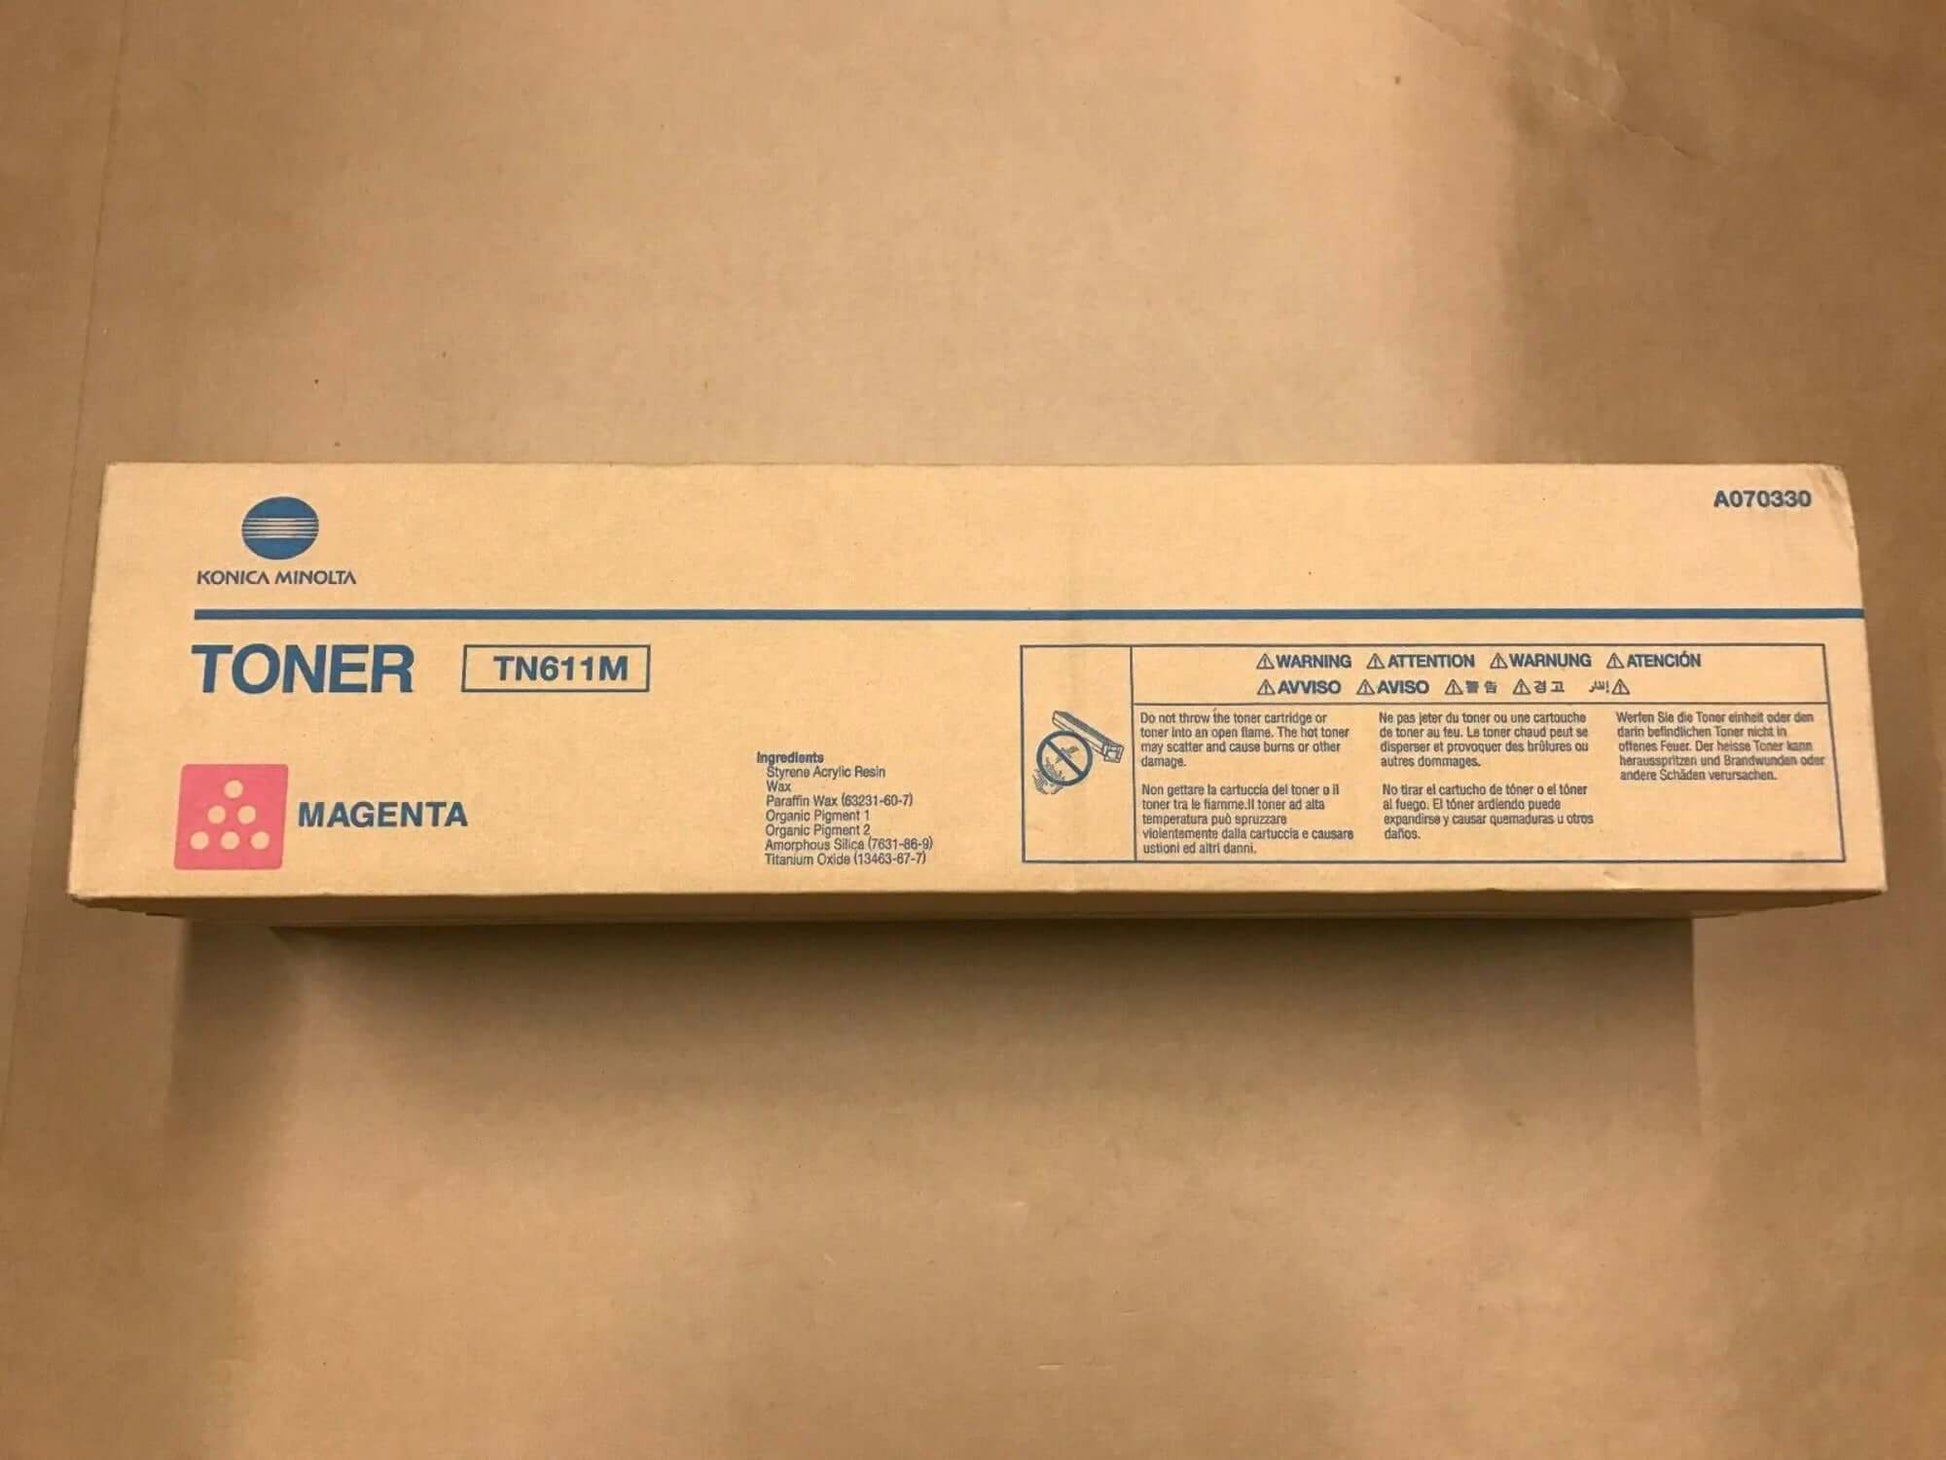 Genuine Konica TN611M Magenta Toner for C451 C550 C650 Free Same Day Shipping - copier-clearance-center